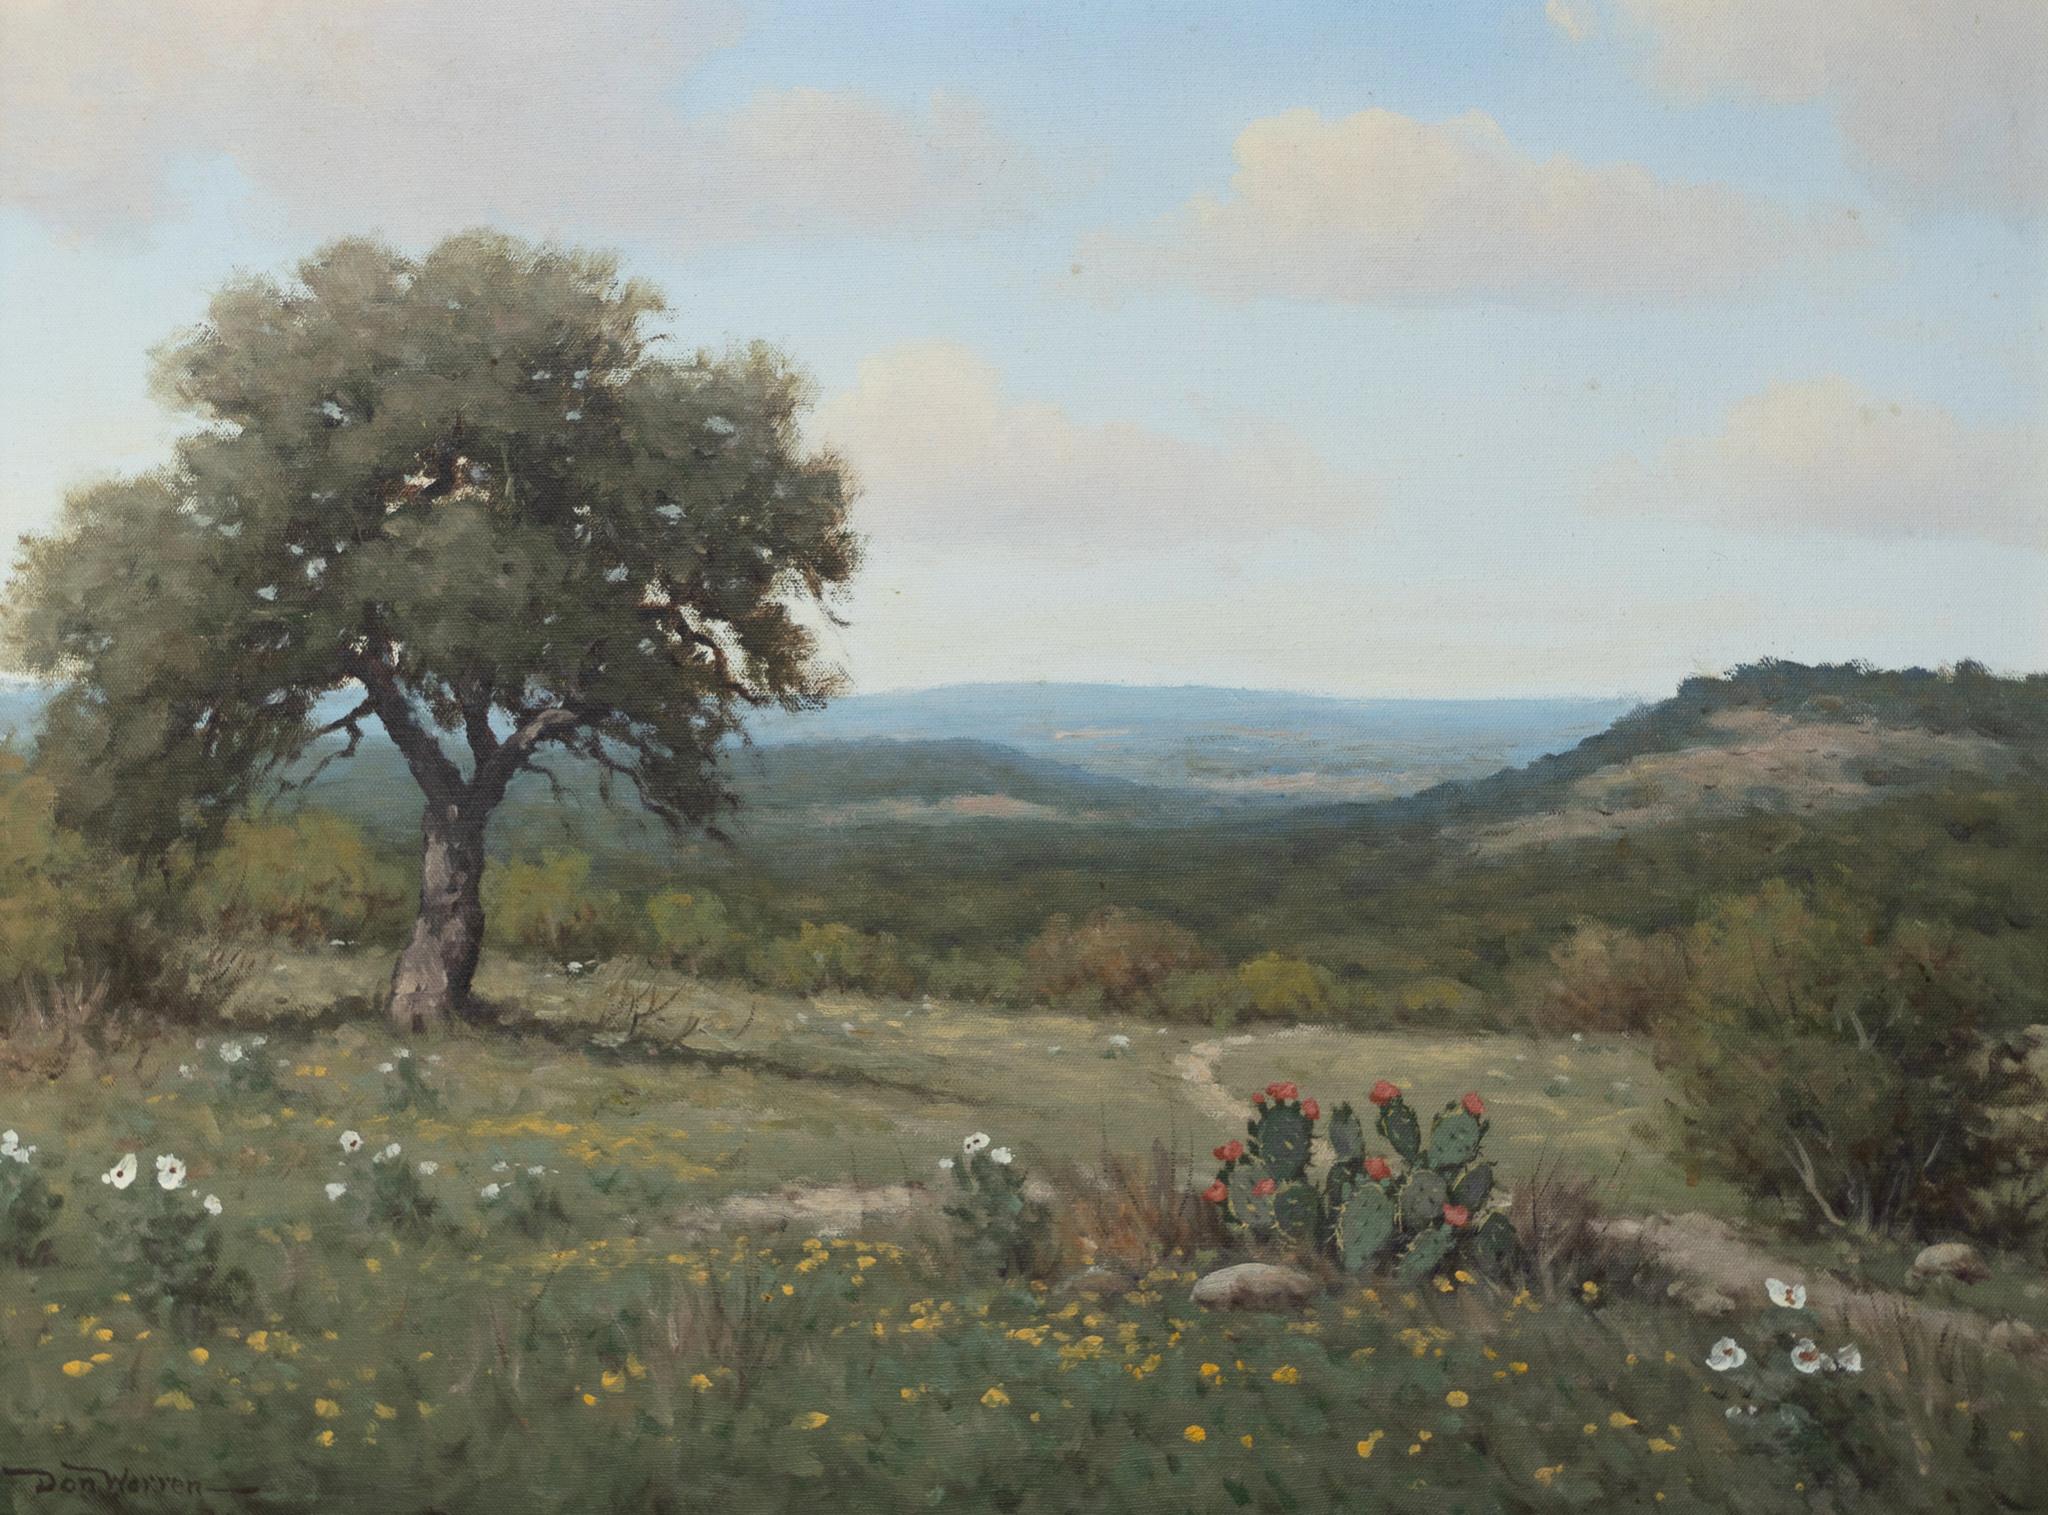 Don Warren Landscape Painting - Texas Hill Country Landscape with Argemone, Coreopsis, and Flowering Cactus"